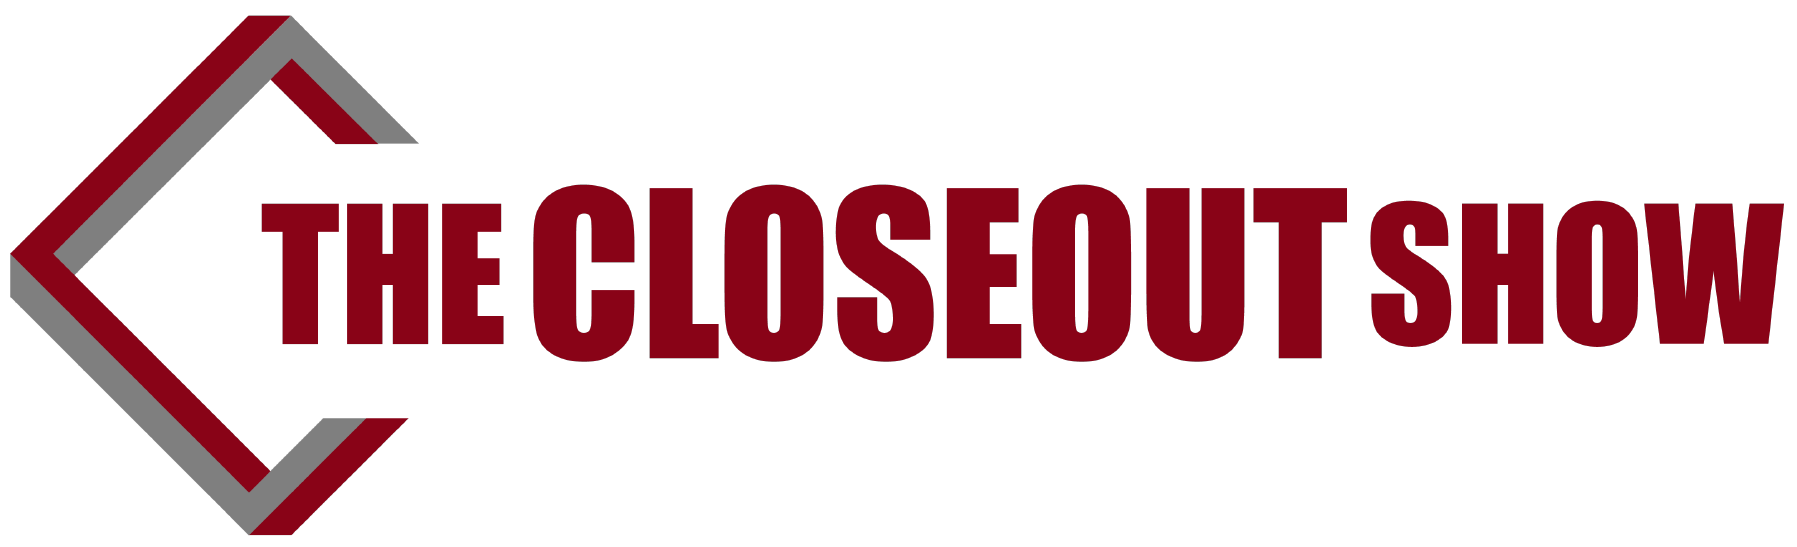 The Closeout Show logo